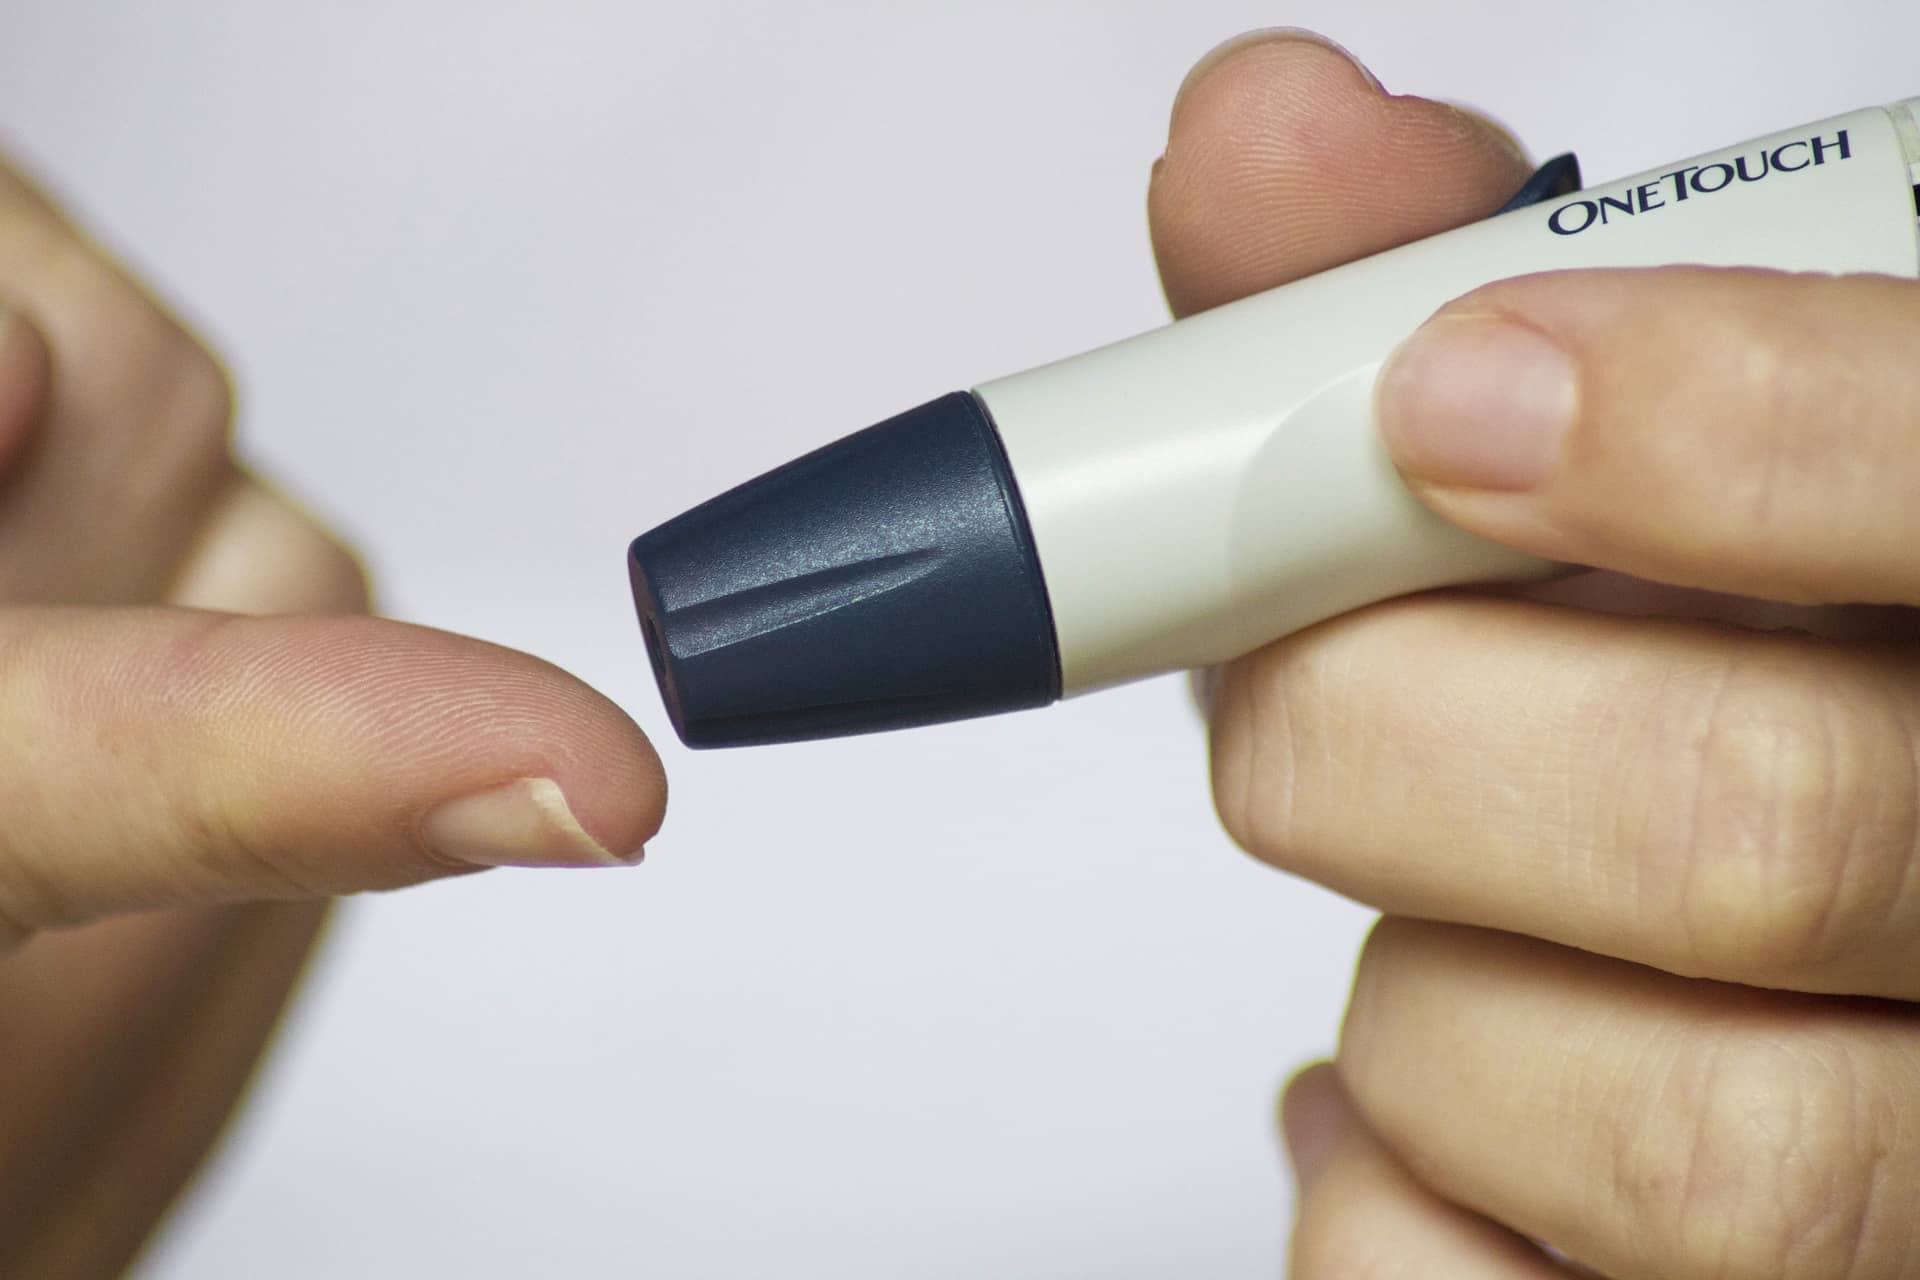 Blood Glucose test, which is one of the key strategies in managing and treating diabetic peripheral neuropathy